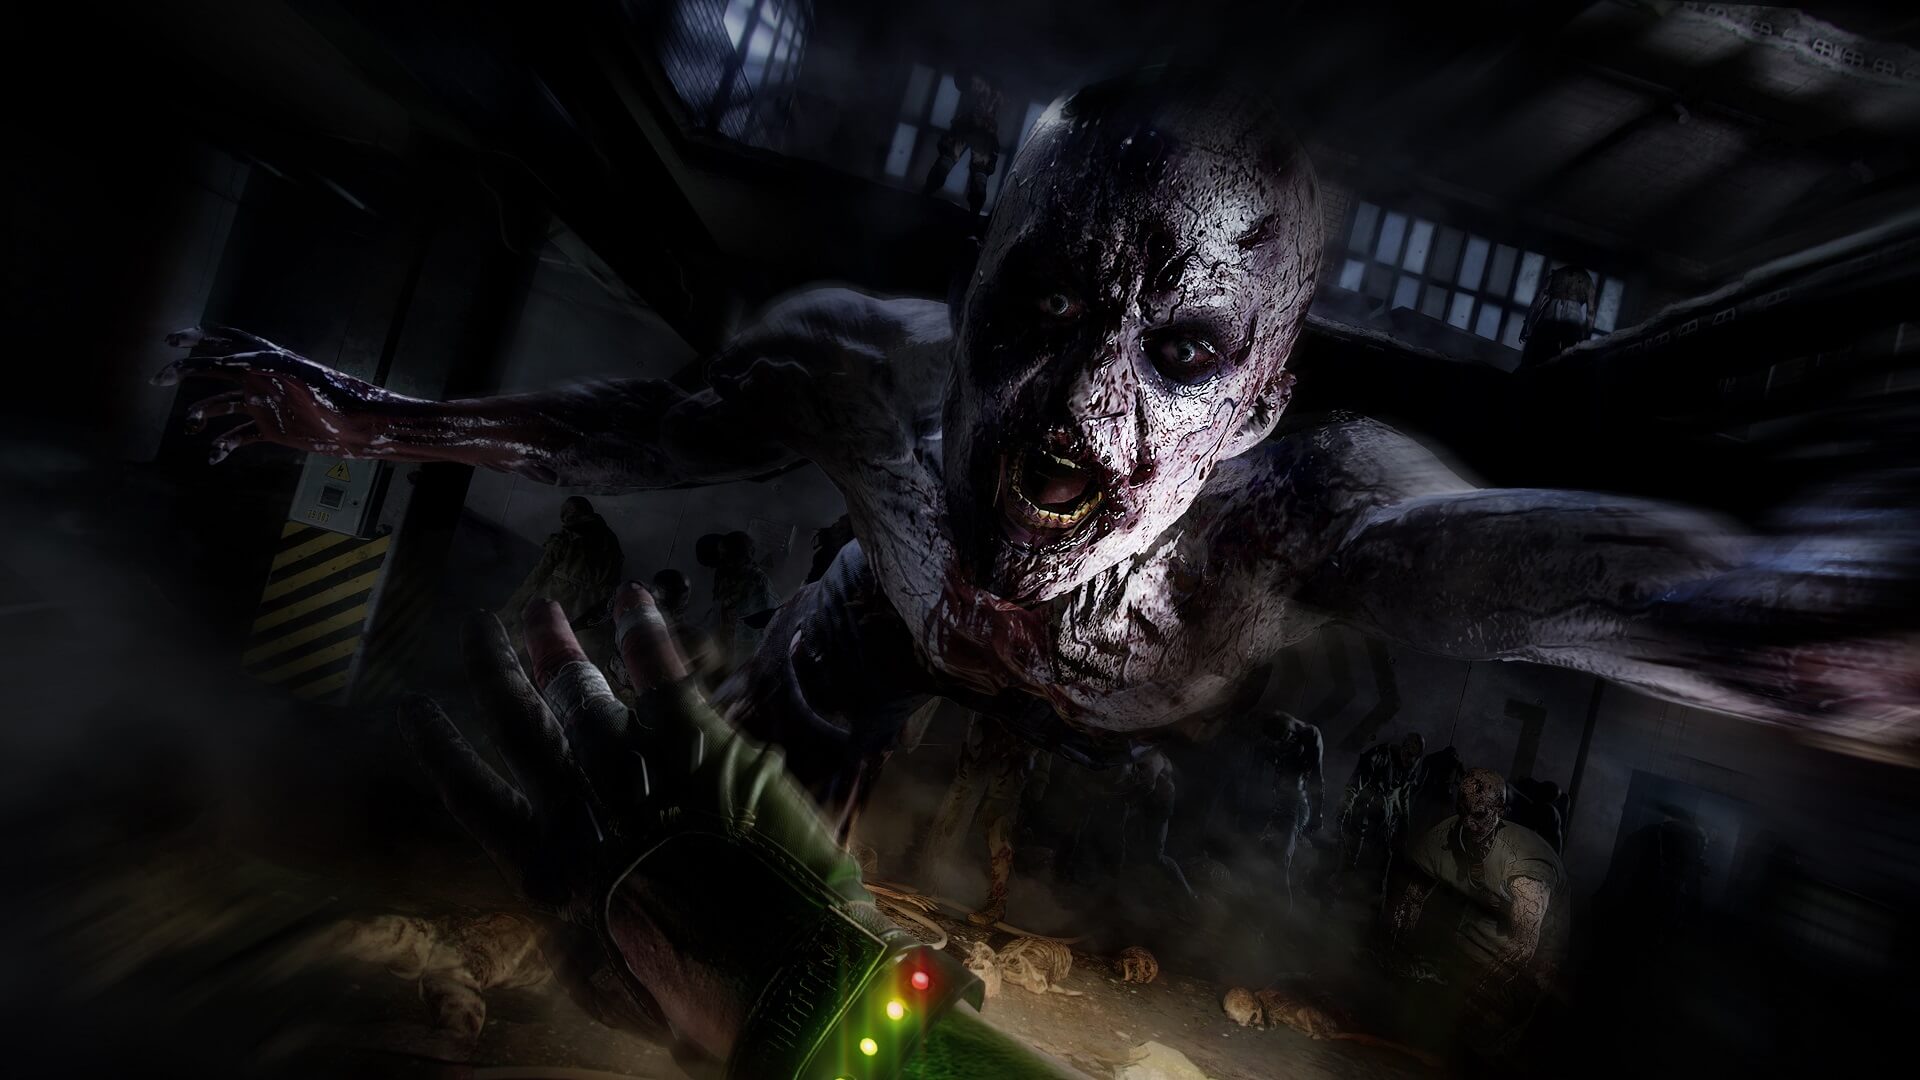 A zombie lunging for the player in Dying Light 2